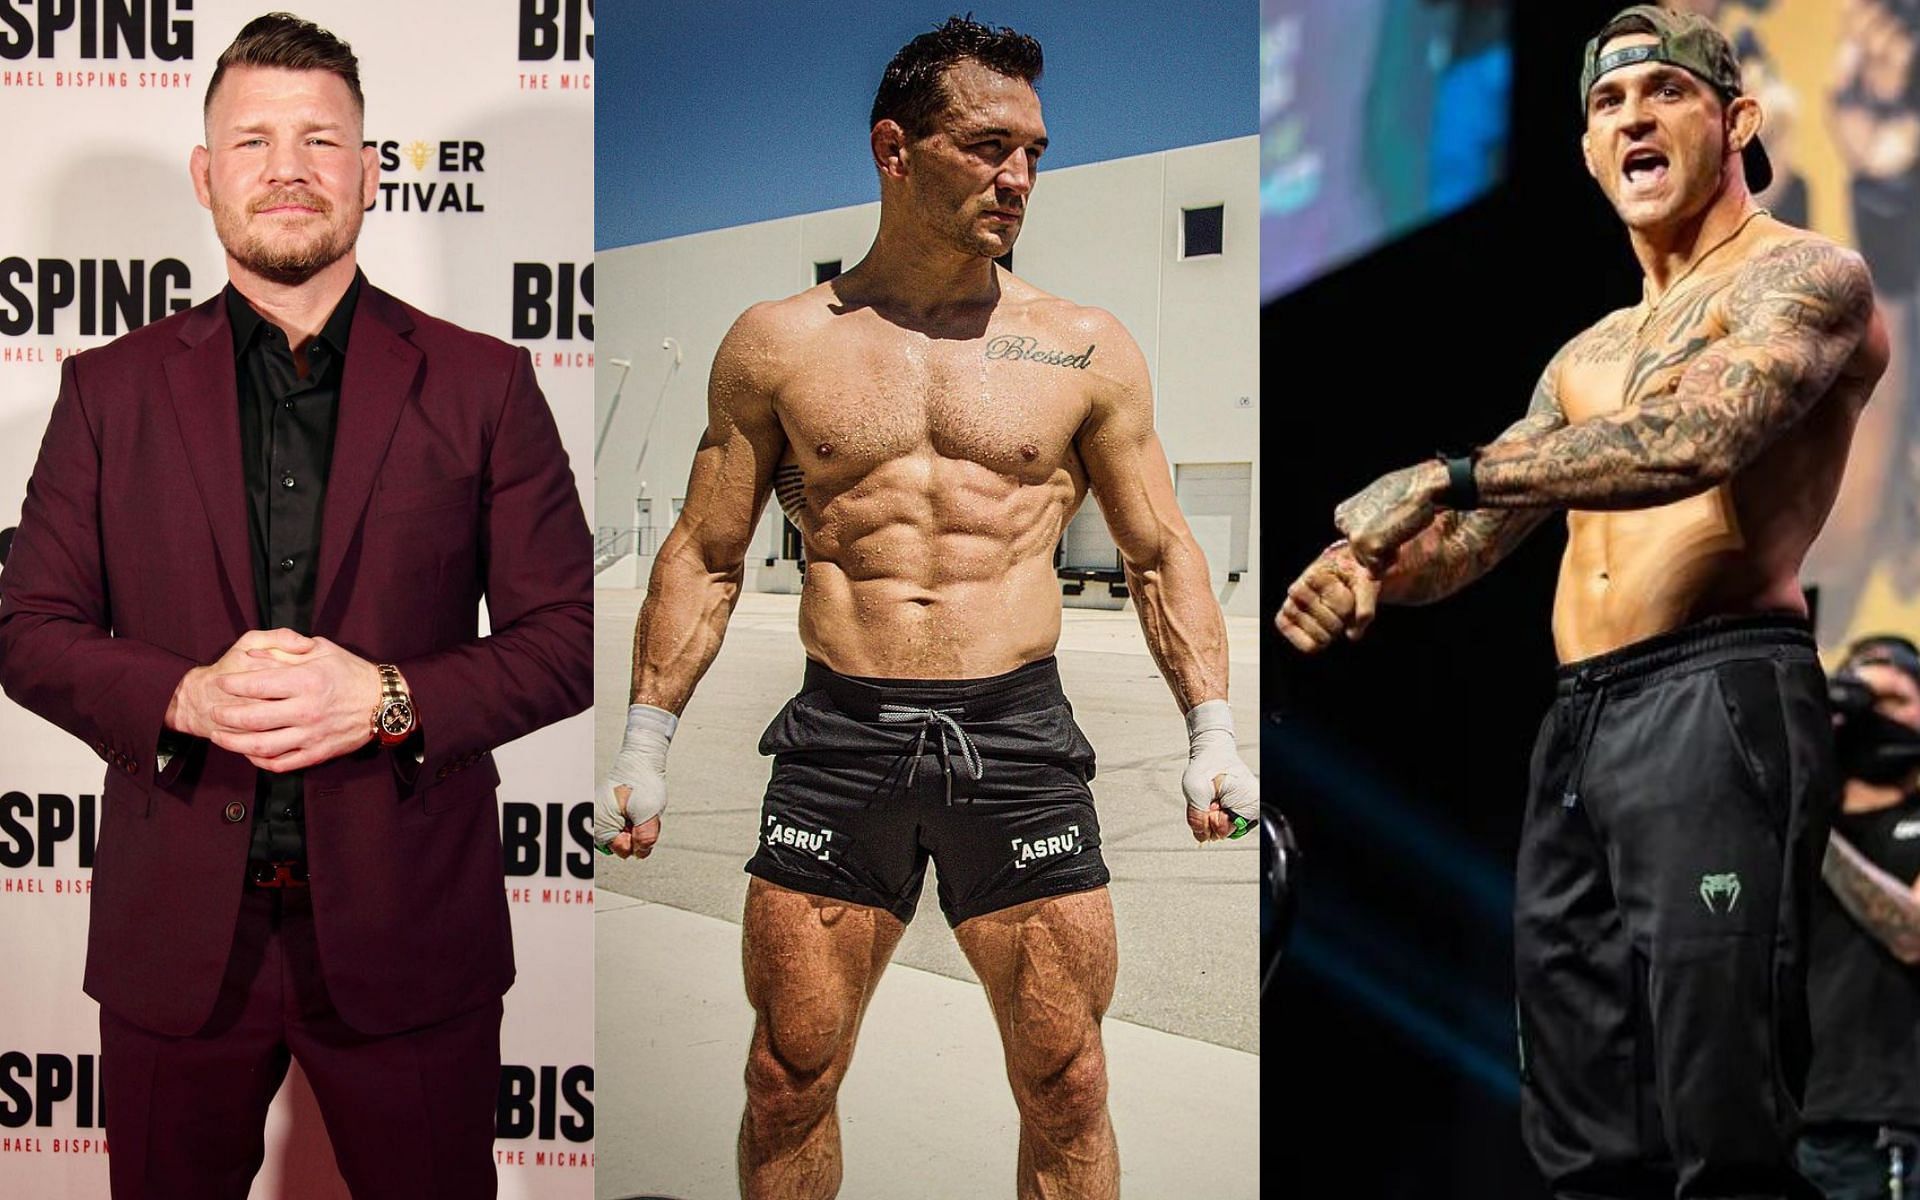 Michael Bisping (left), Michael Chandler (center), Dustin Poirier (right) [Images courtesy: @mikebisping, @mikechandlermma and @dustinpoirier via Instagram]